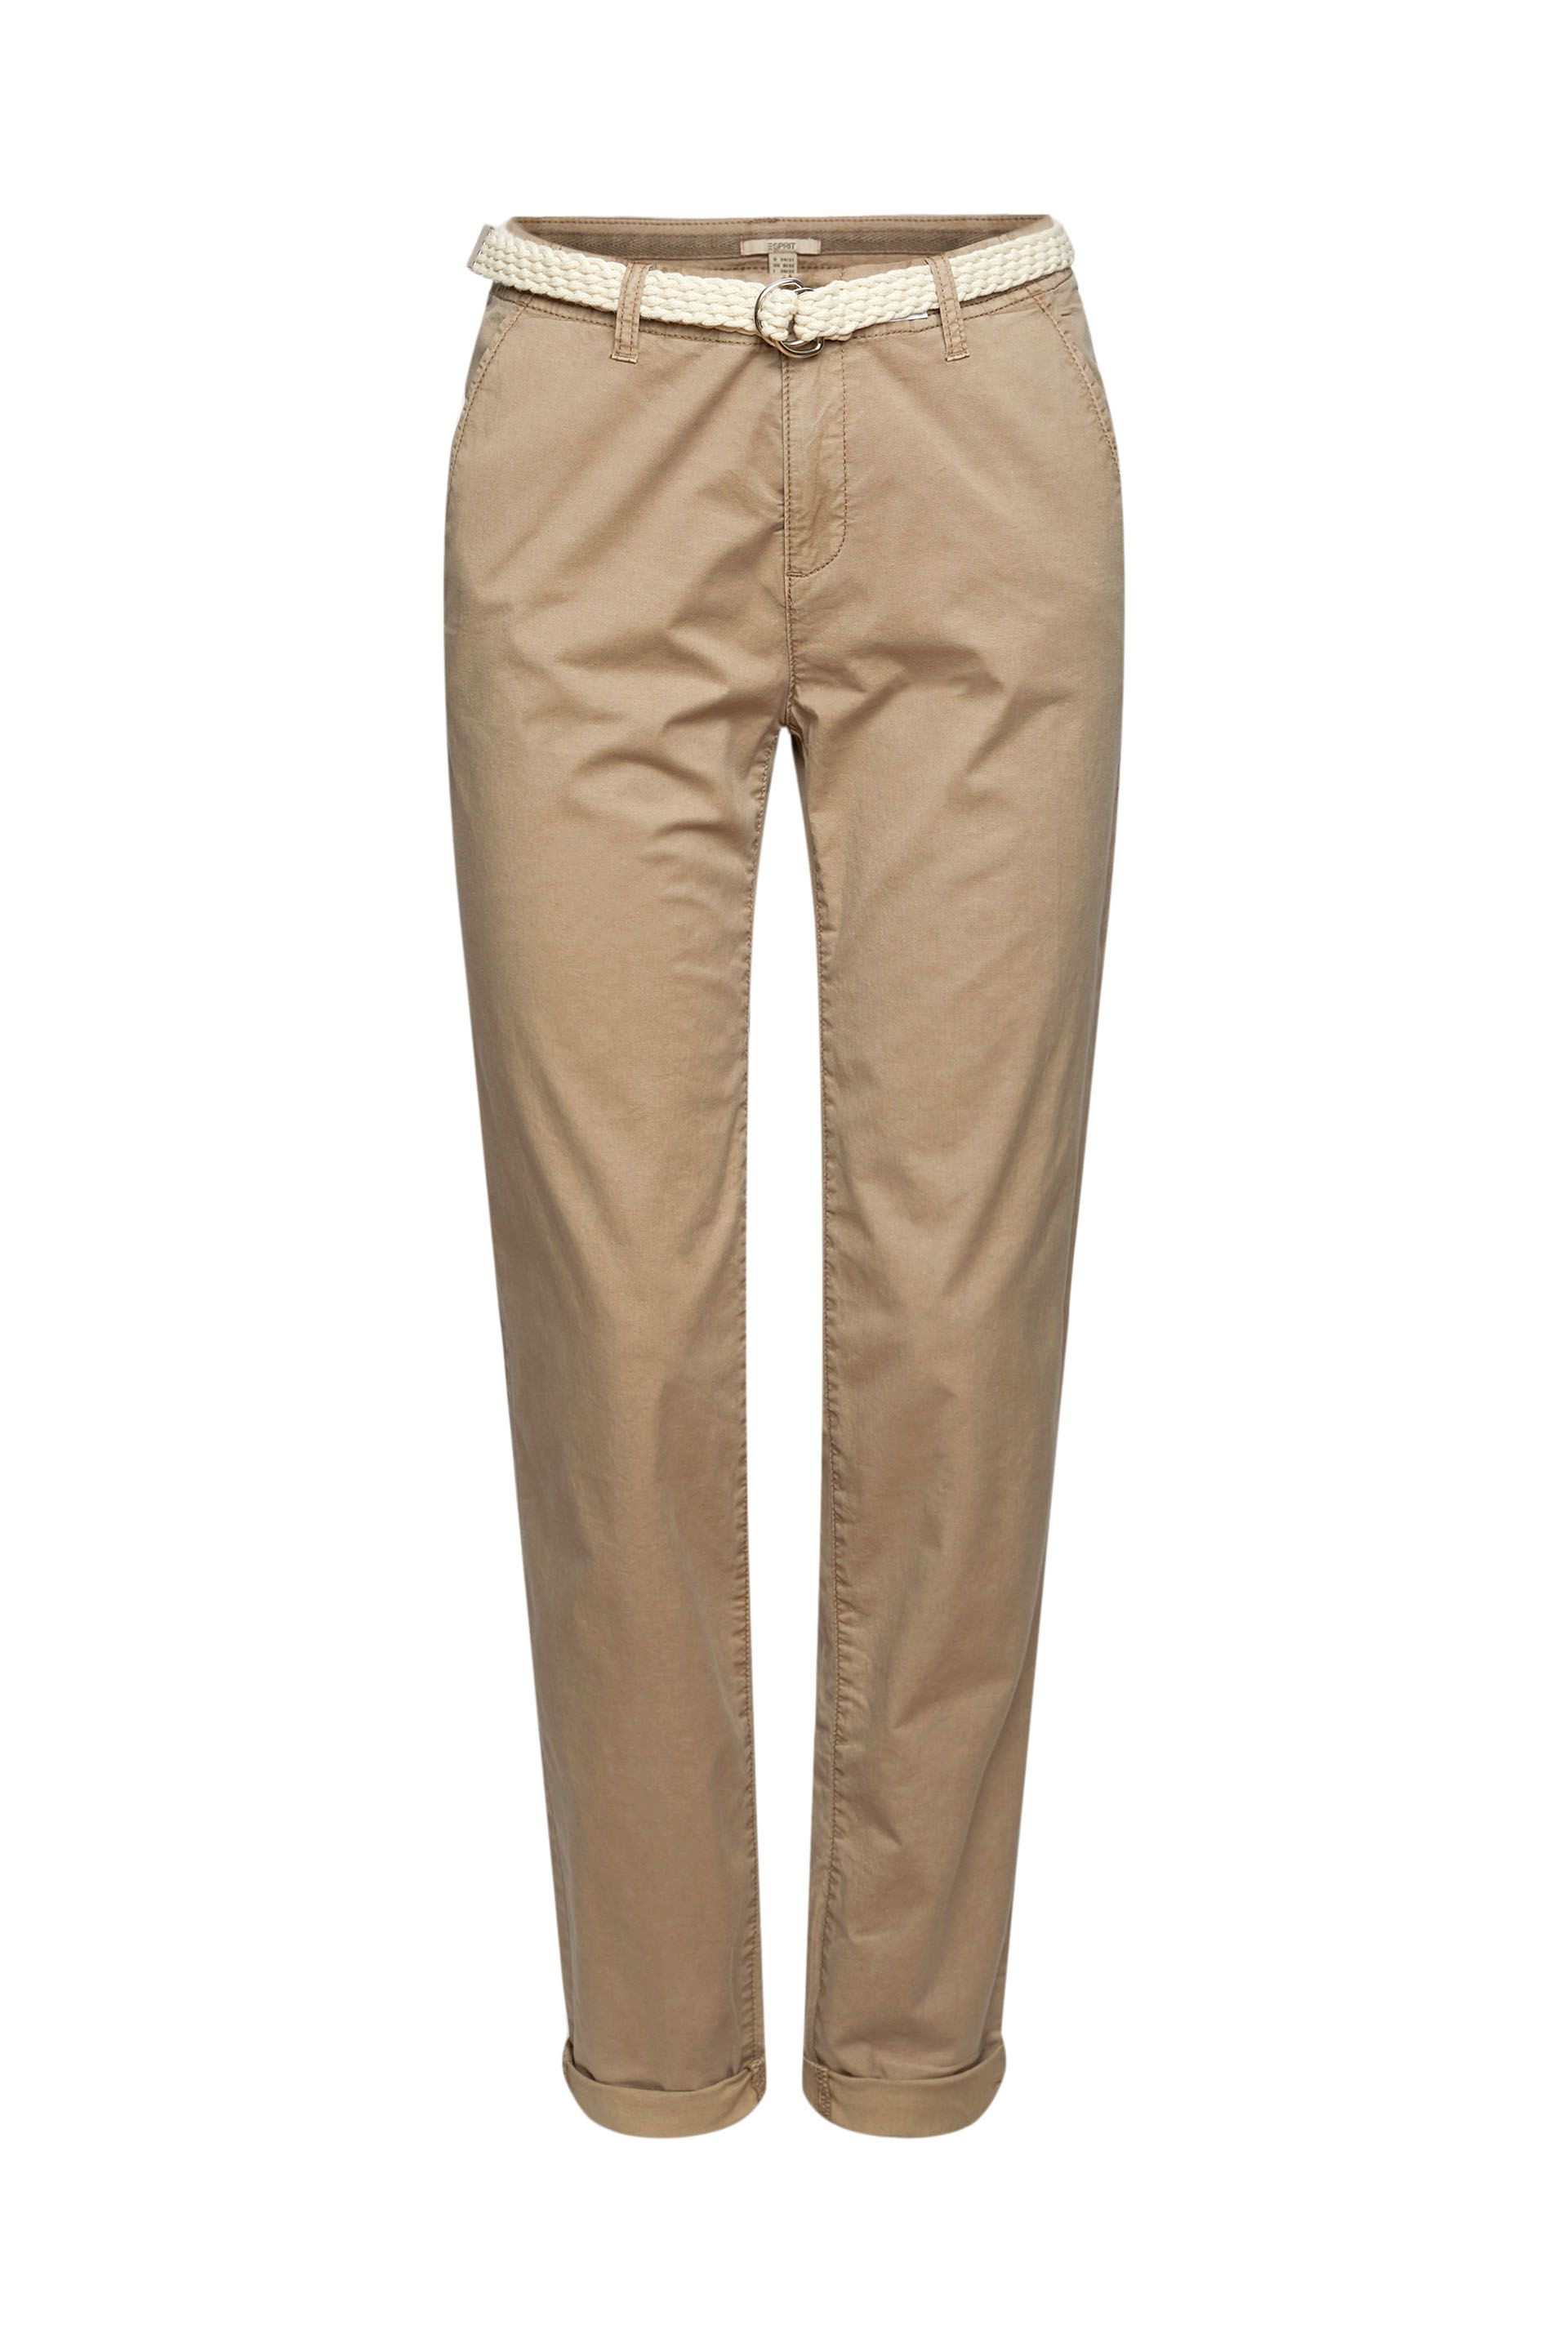 Chino trousers with woven belt, Nougat Beige, large image number 0